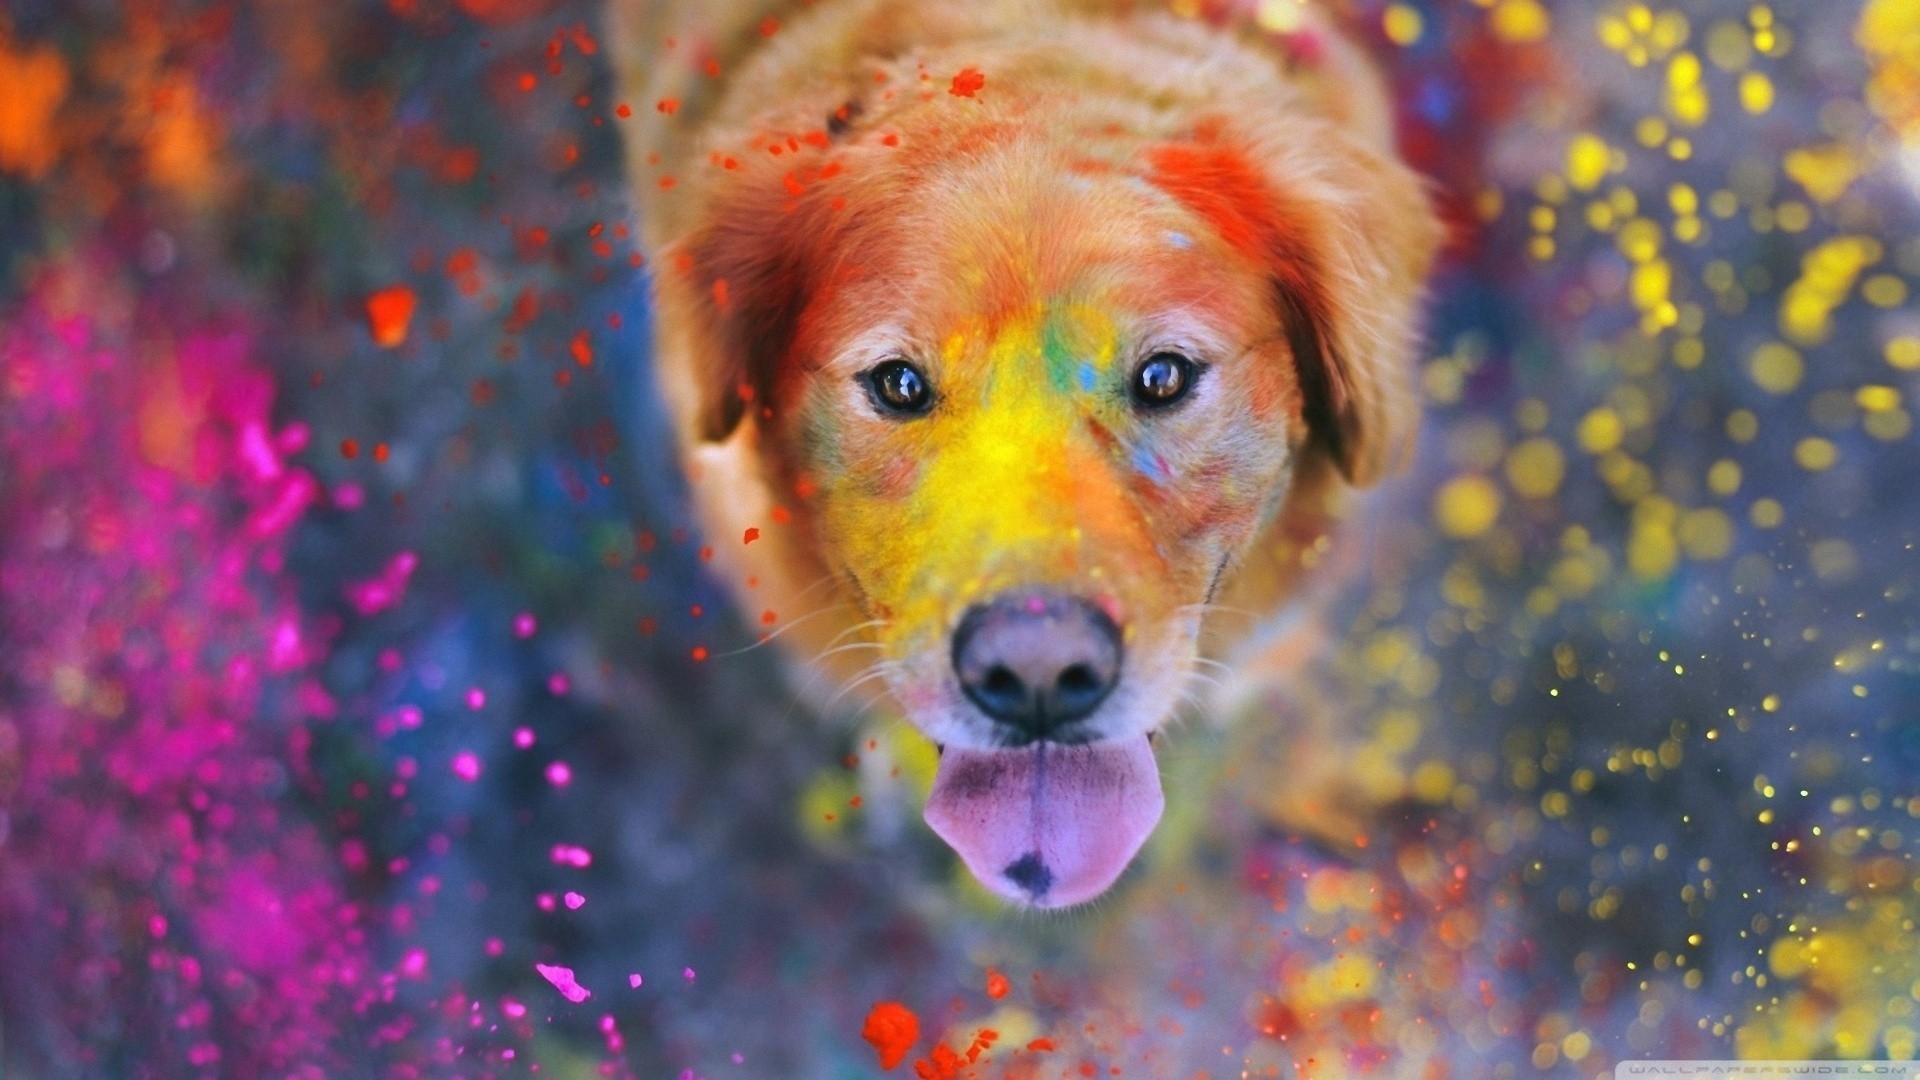 General 1920x1080 animals dog paint splatter colorful tongues bokeh dust Labrador Retriever looking at viewer looking up photography mammals watermarked